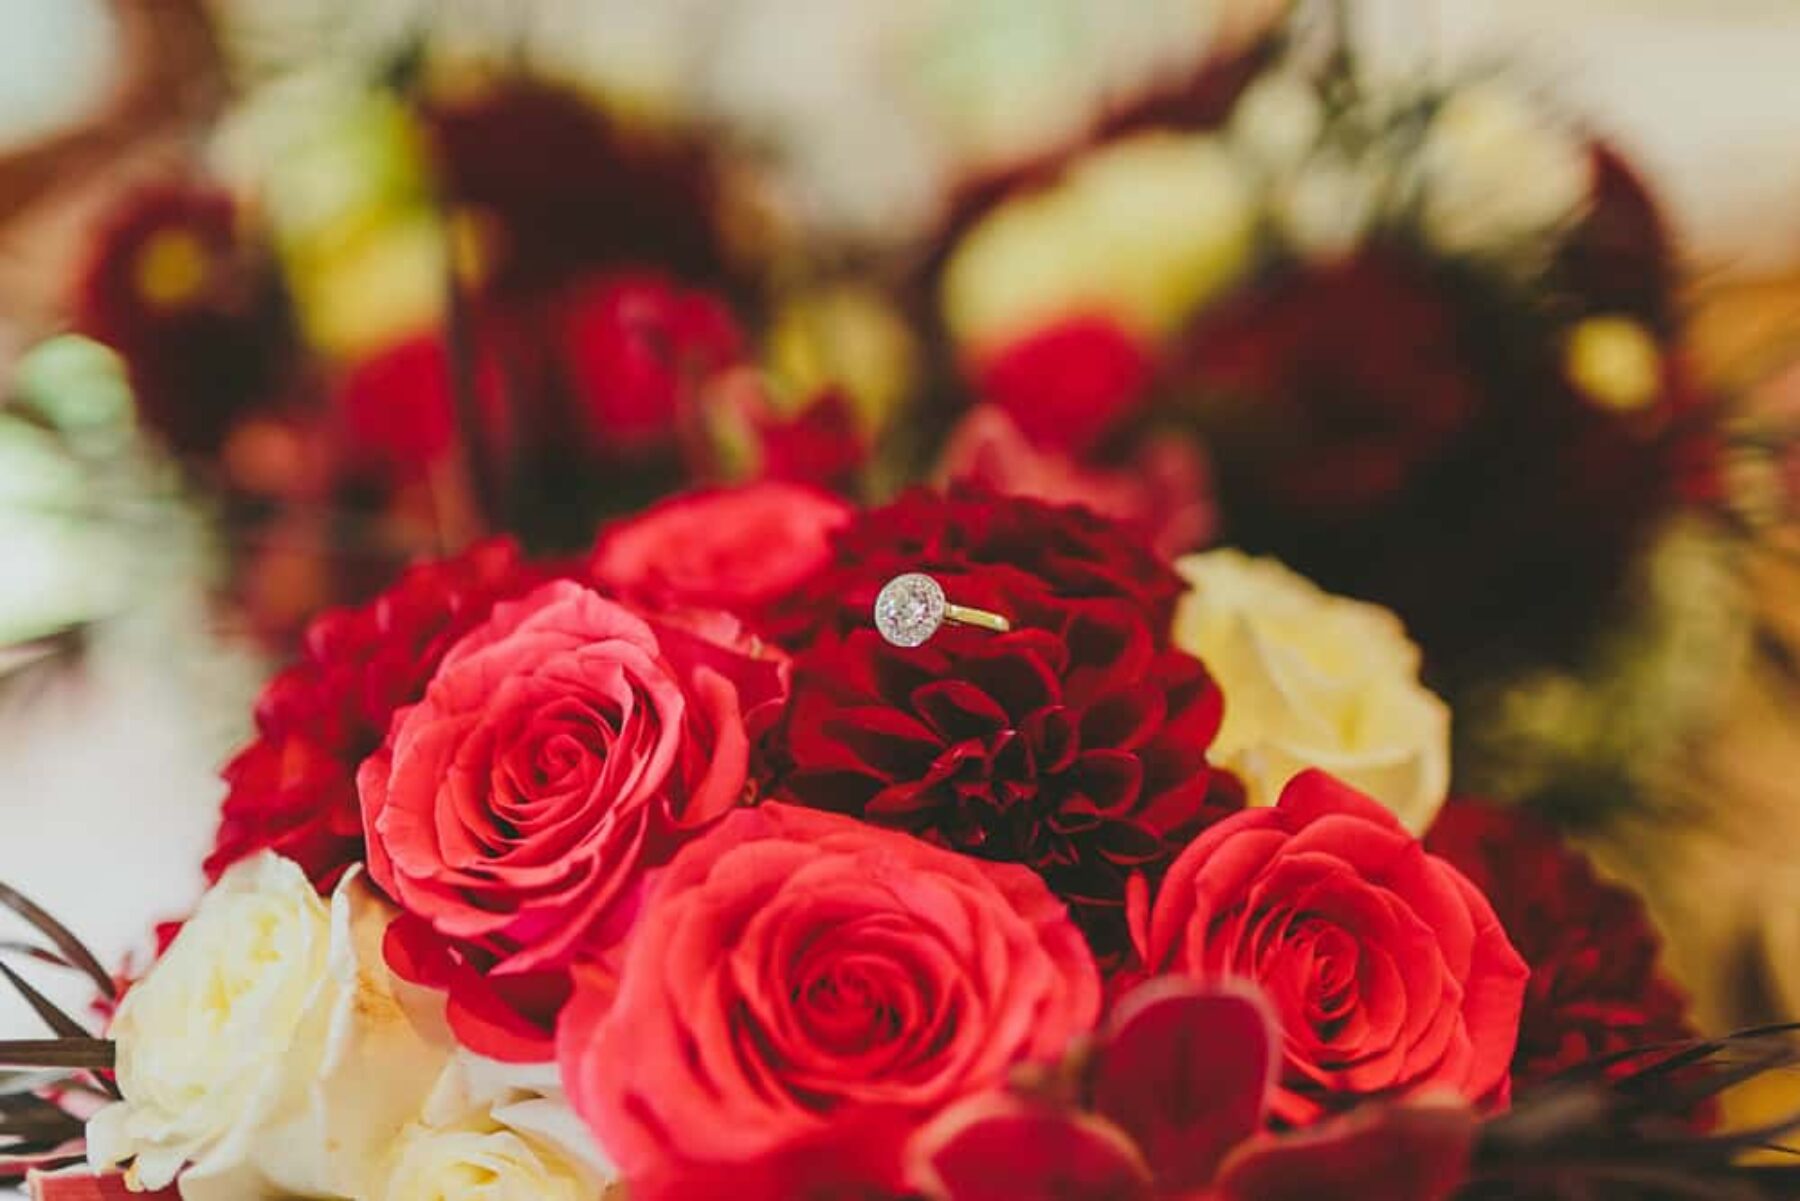 engagement ring on wedding bouquet